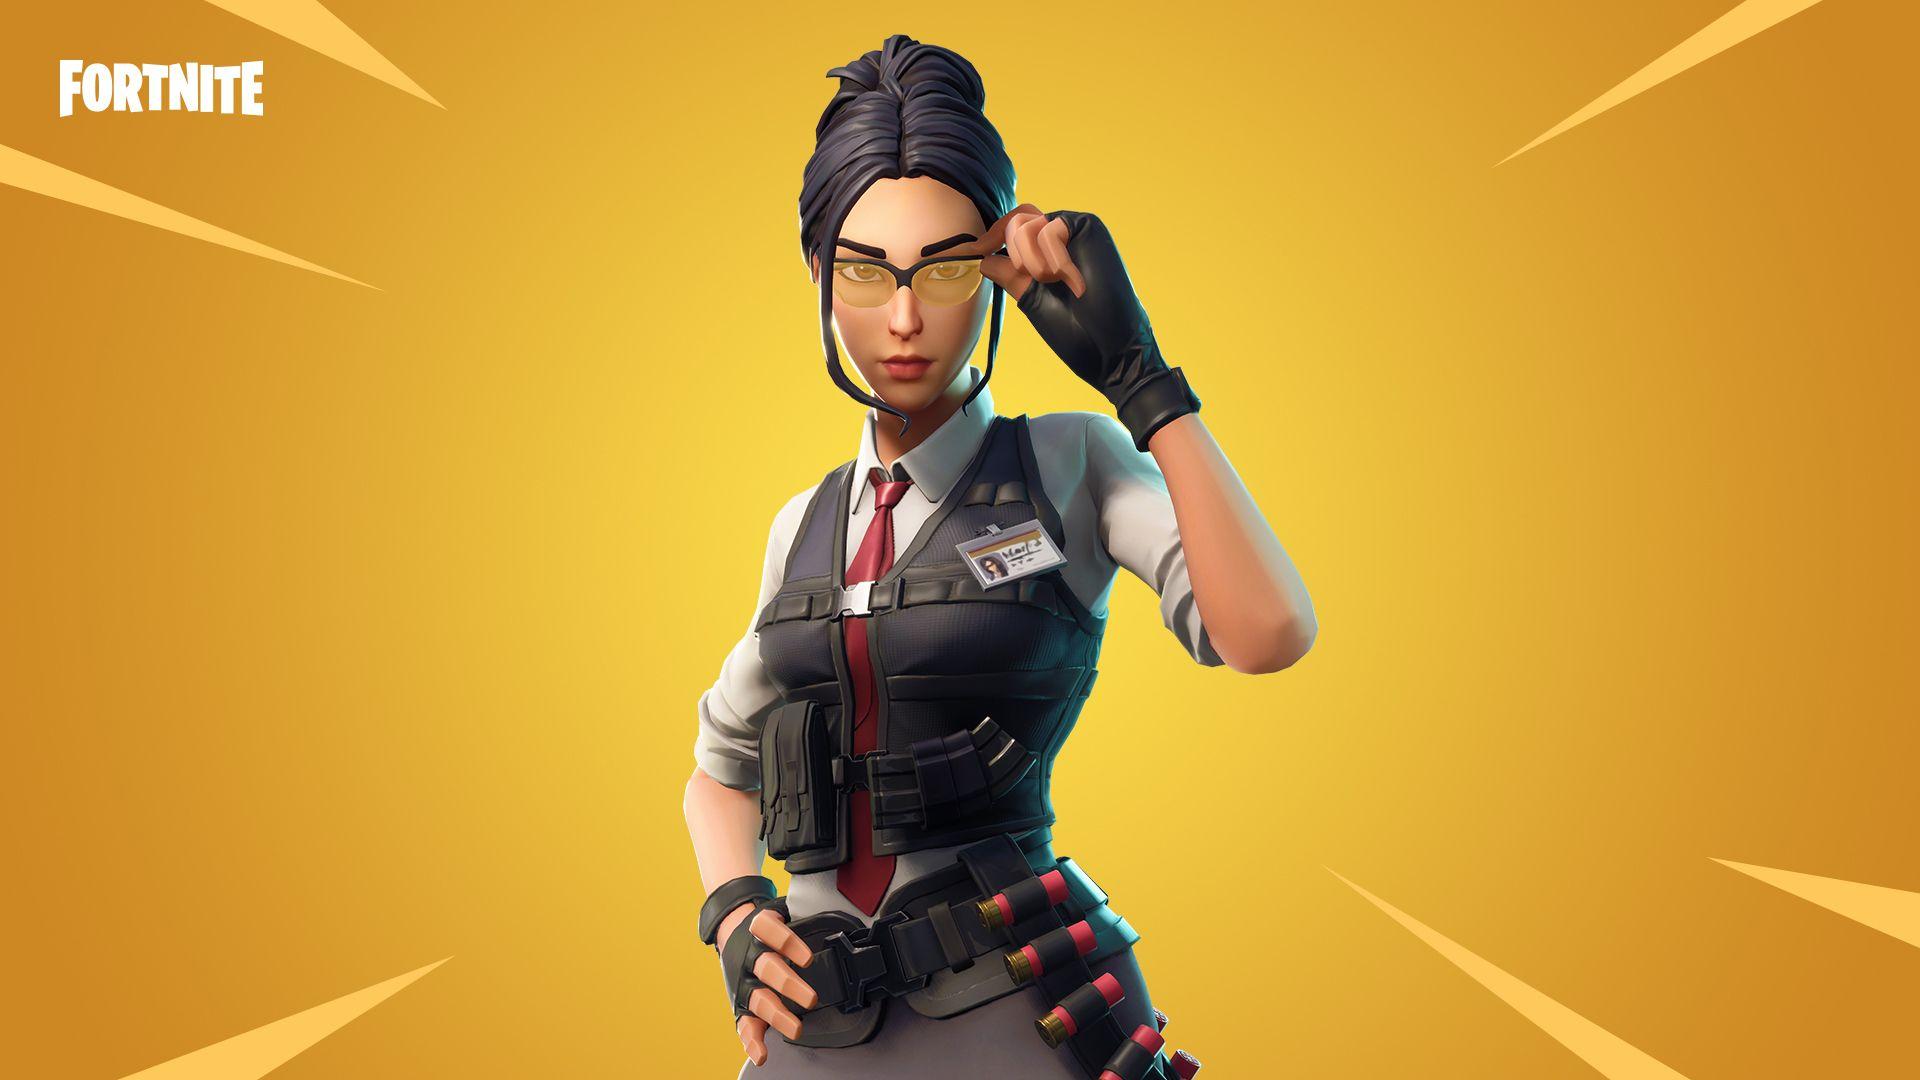 Fortnite video game update adds a new weapon and Mythic Outlander